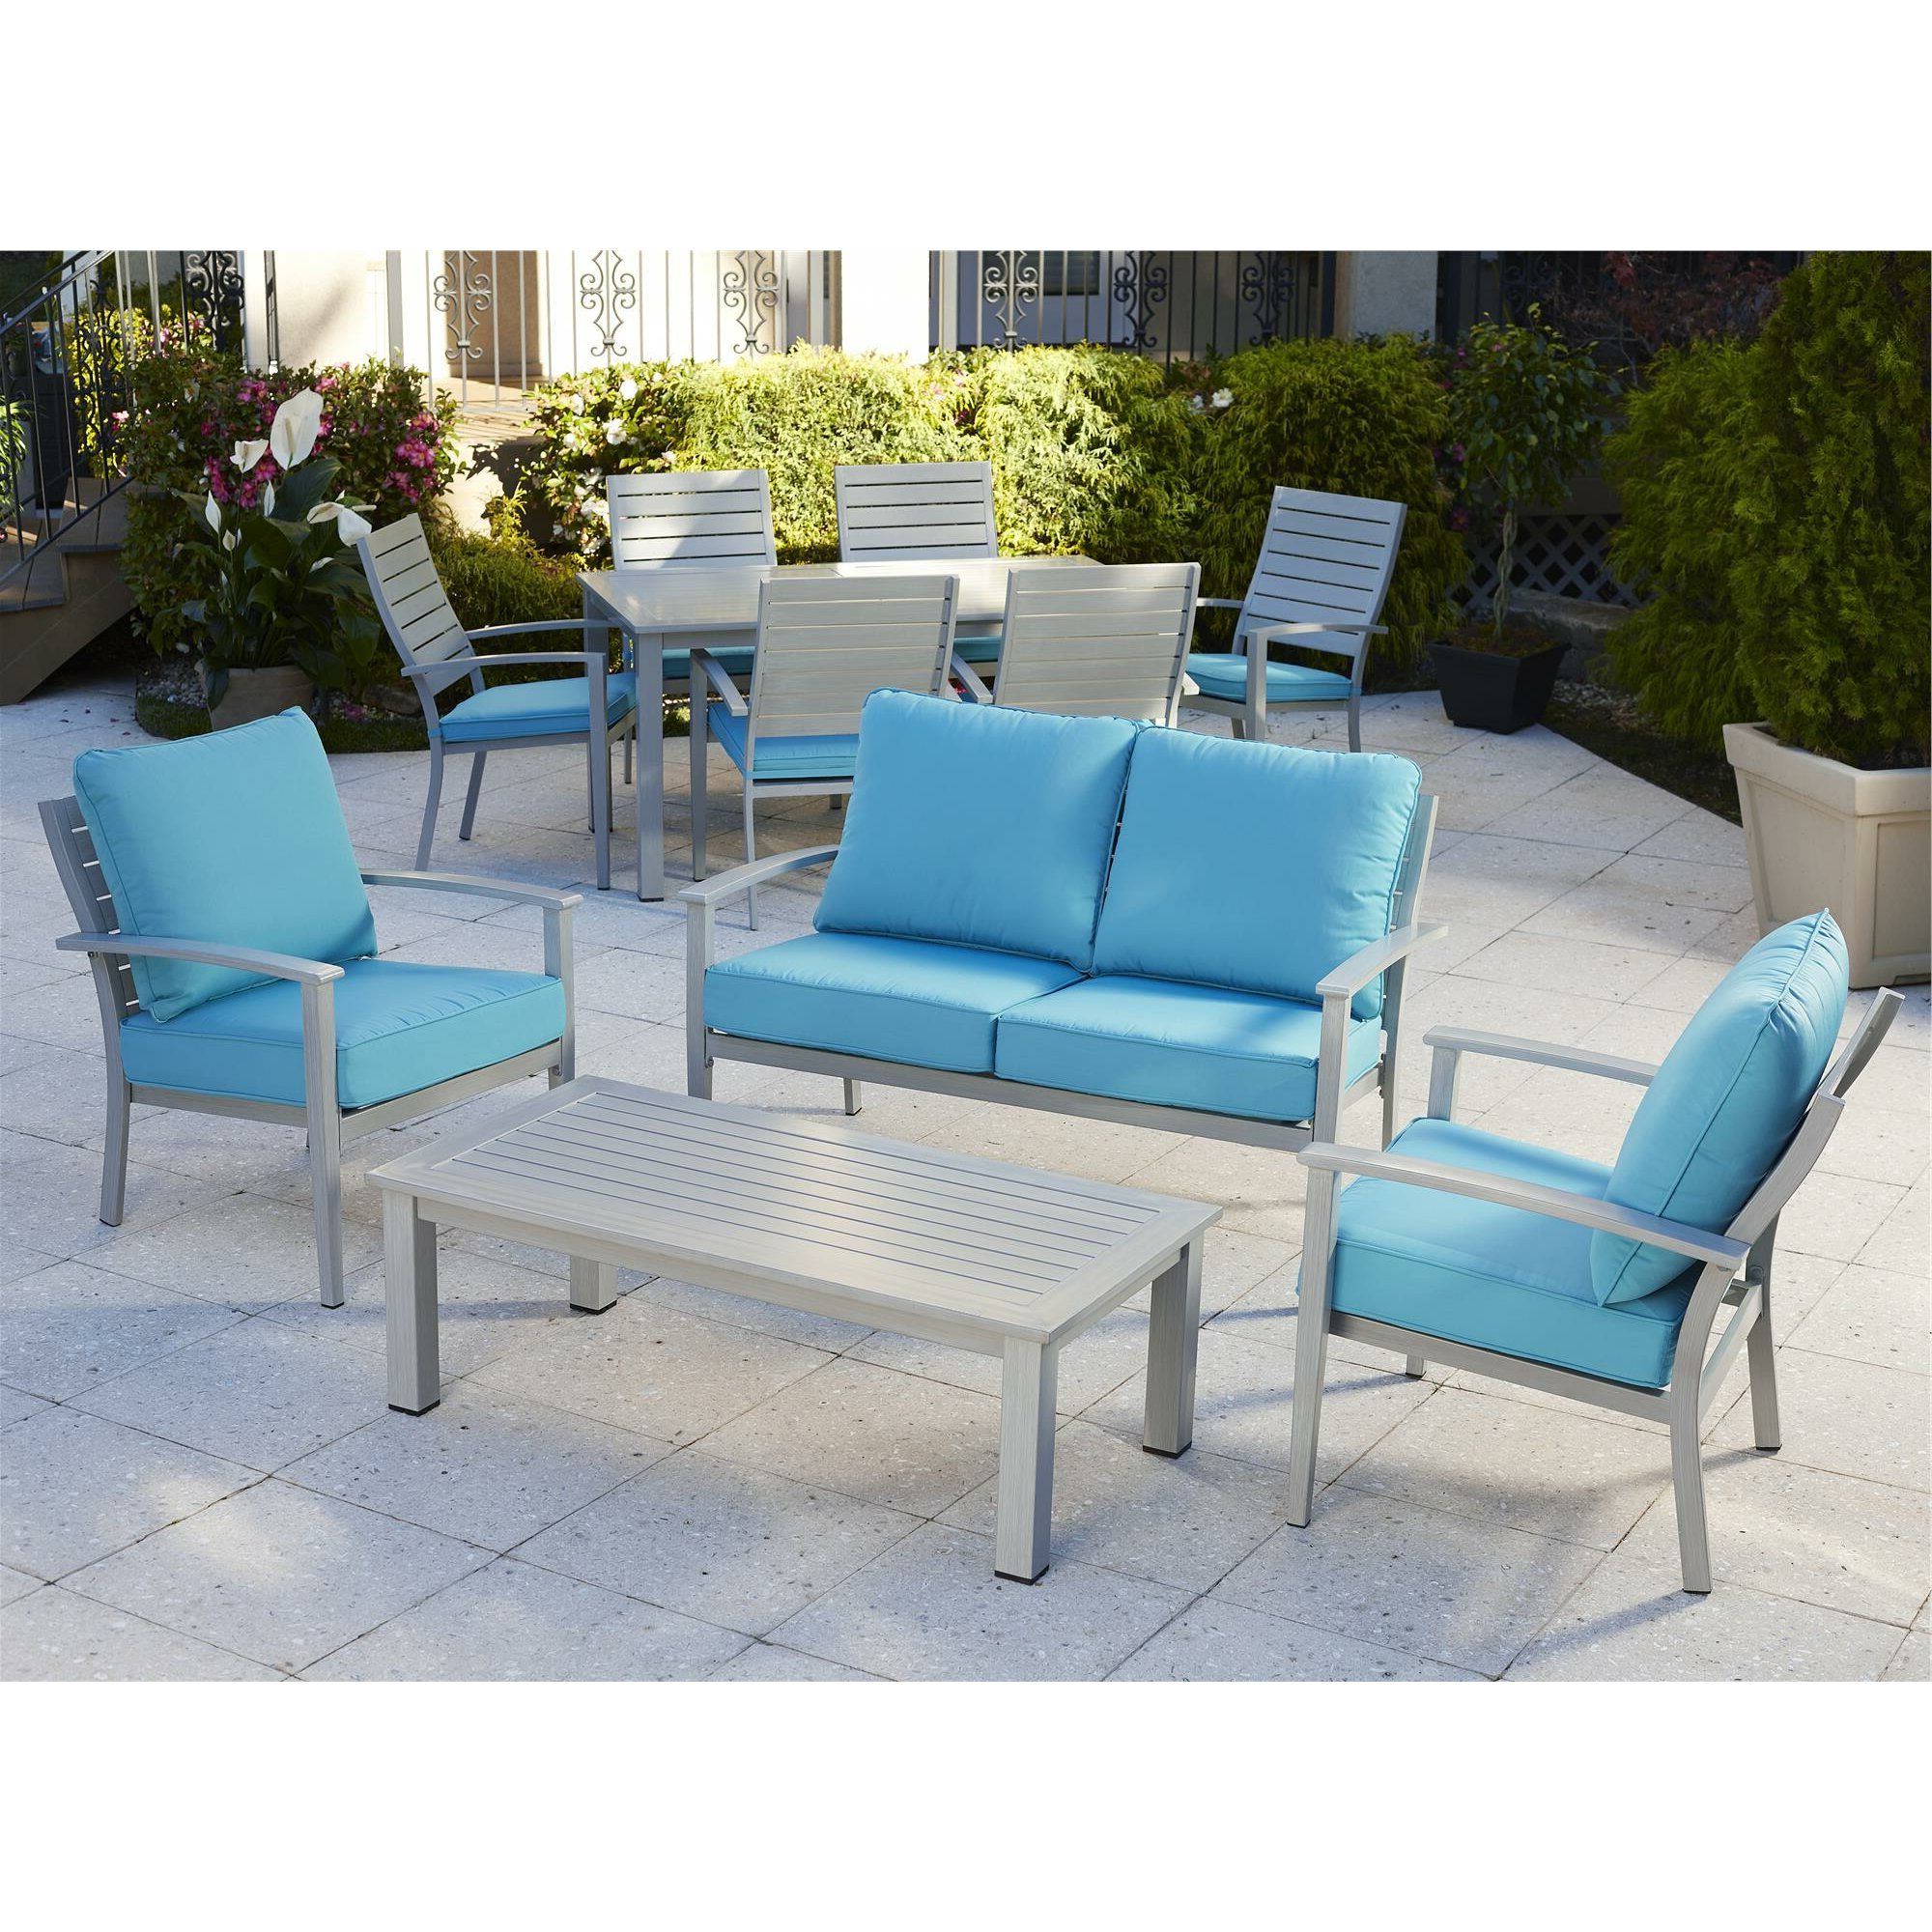 2019 Sky Blue Outdoor Seating Patio Sets Within Outdoor Brushed Aluminum Patio Furniture 4 Piece Deep Seating Group (View 13 of 15)